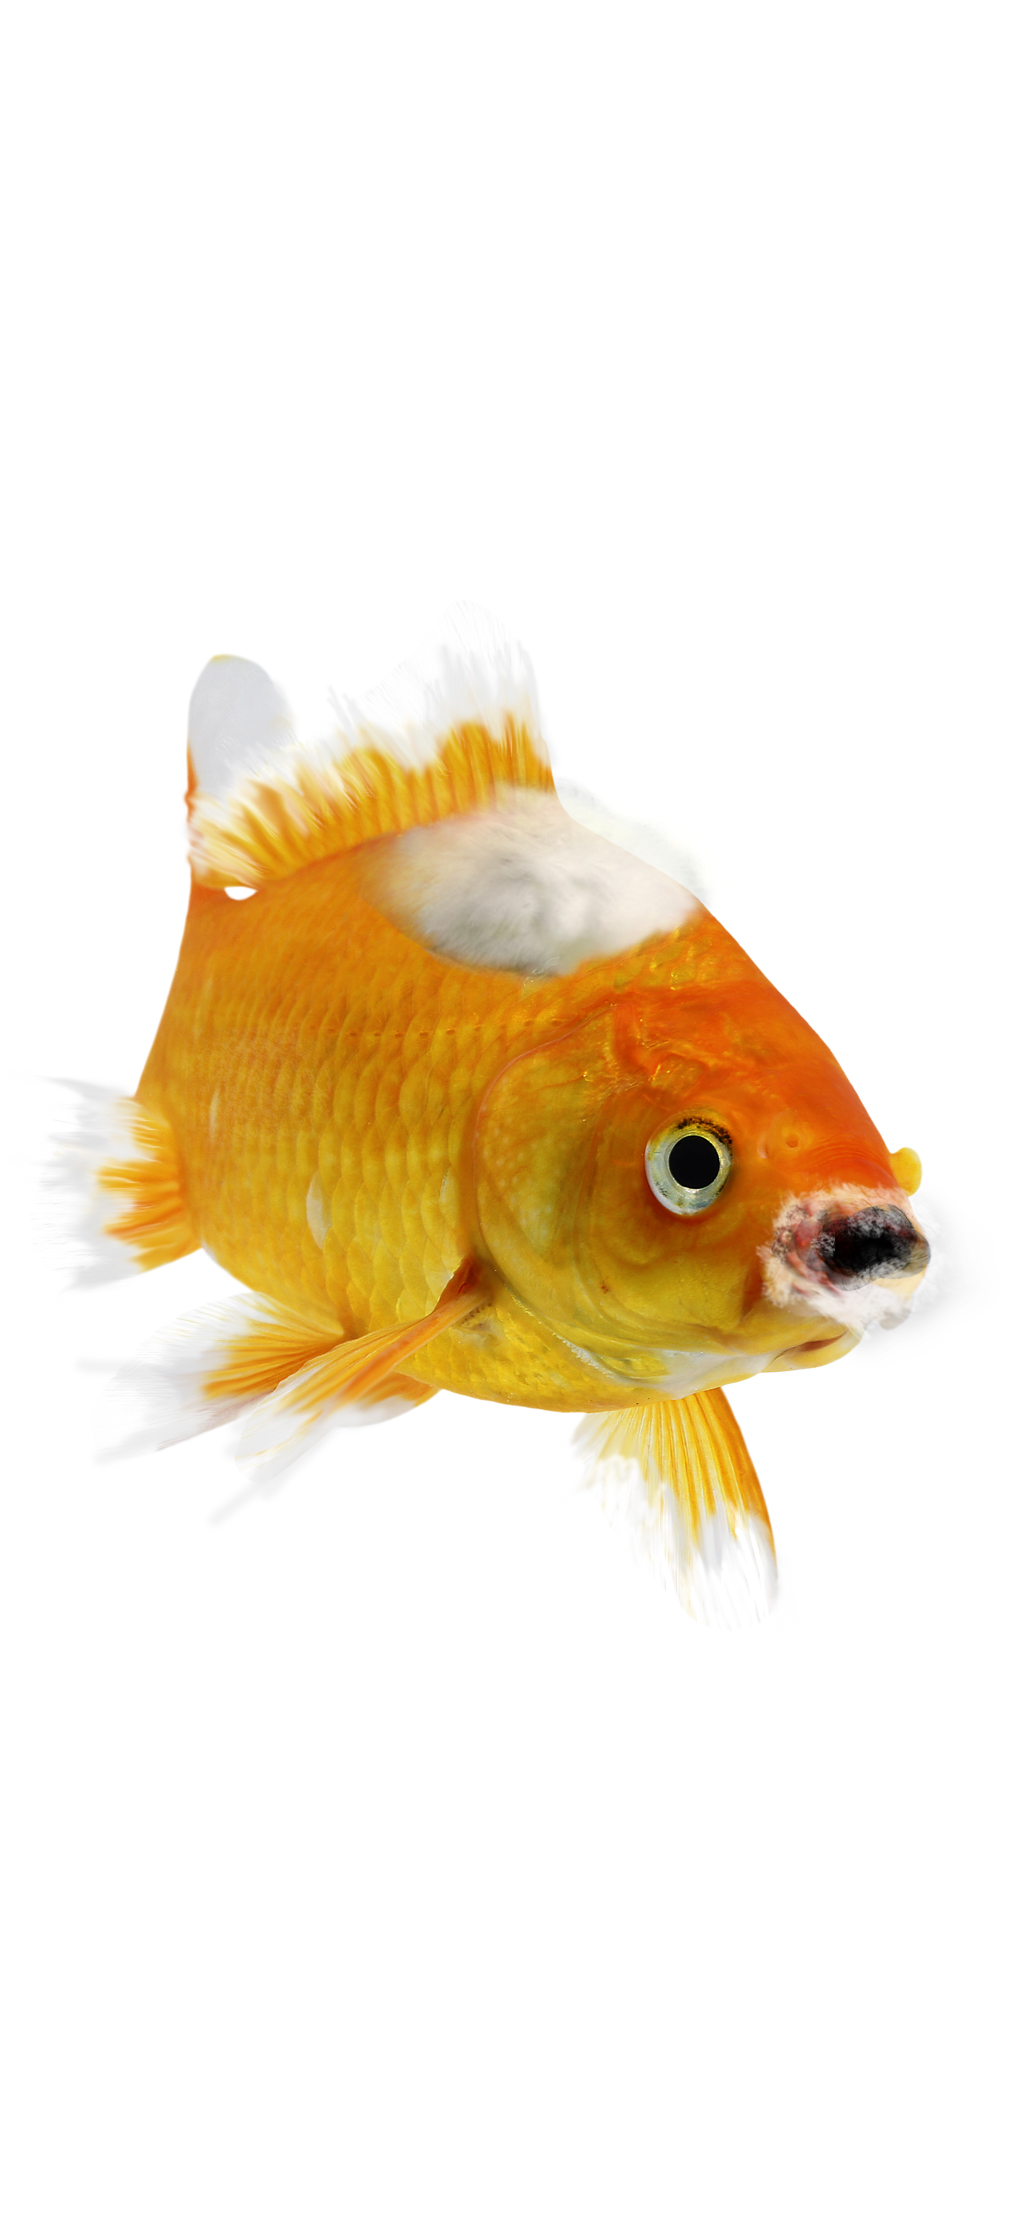 goldfish with fluffy white/grey growths around mouth and body and frayed, tattered fins